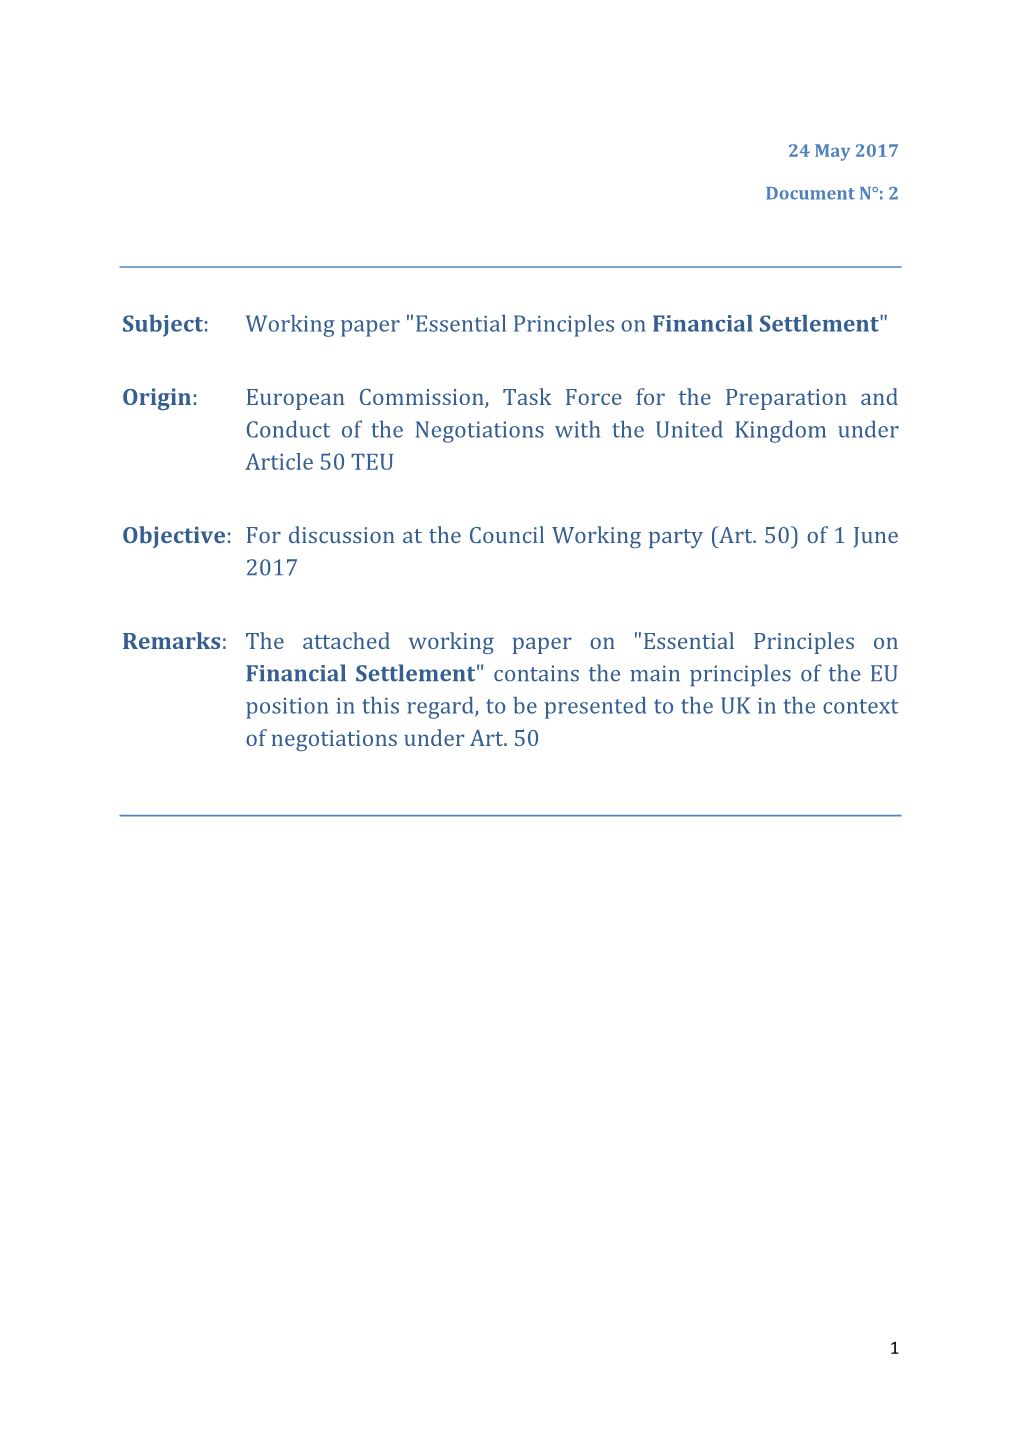 Subject: Working Paper "Essential Principles on Financial Settlement"